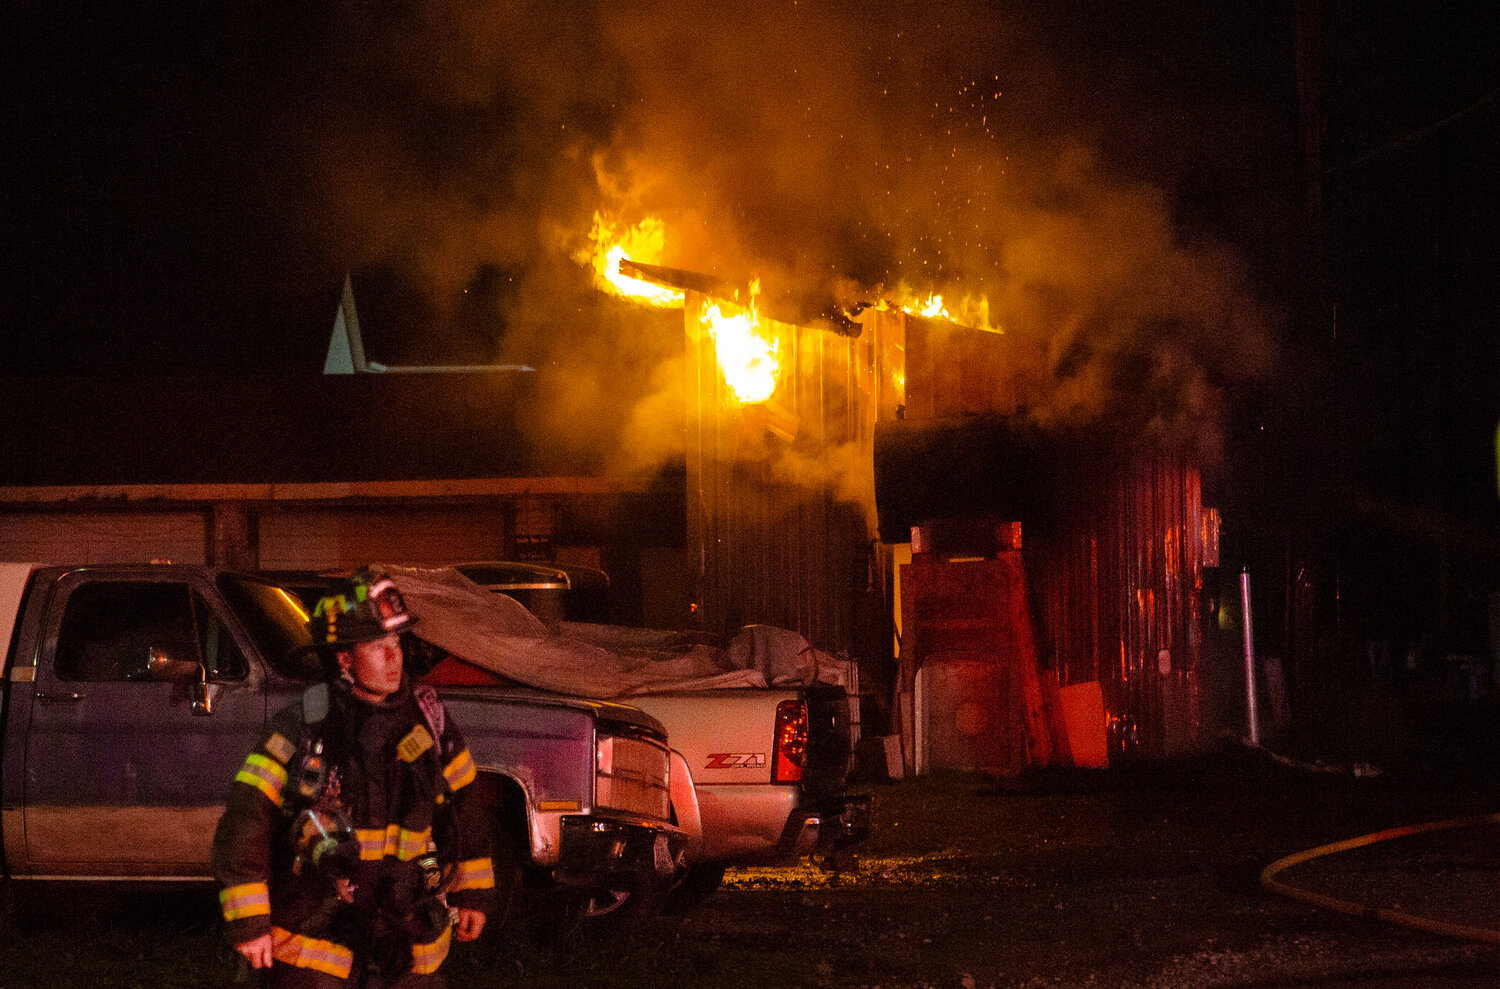 Riverside Fire Authority and Centralia Police respond to a burning outbuilding near the corners of North Pearl and Fourth Streets on Tuesday night, Nov. 21, at about 6:30 p.m.